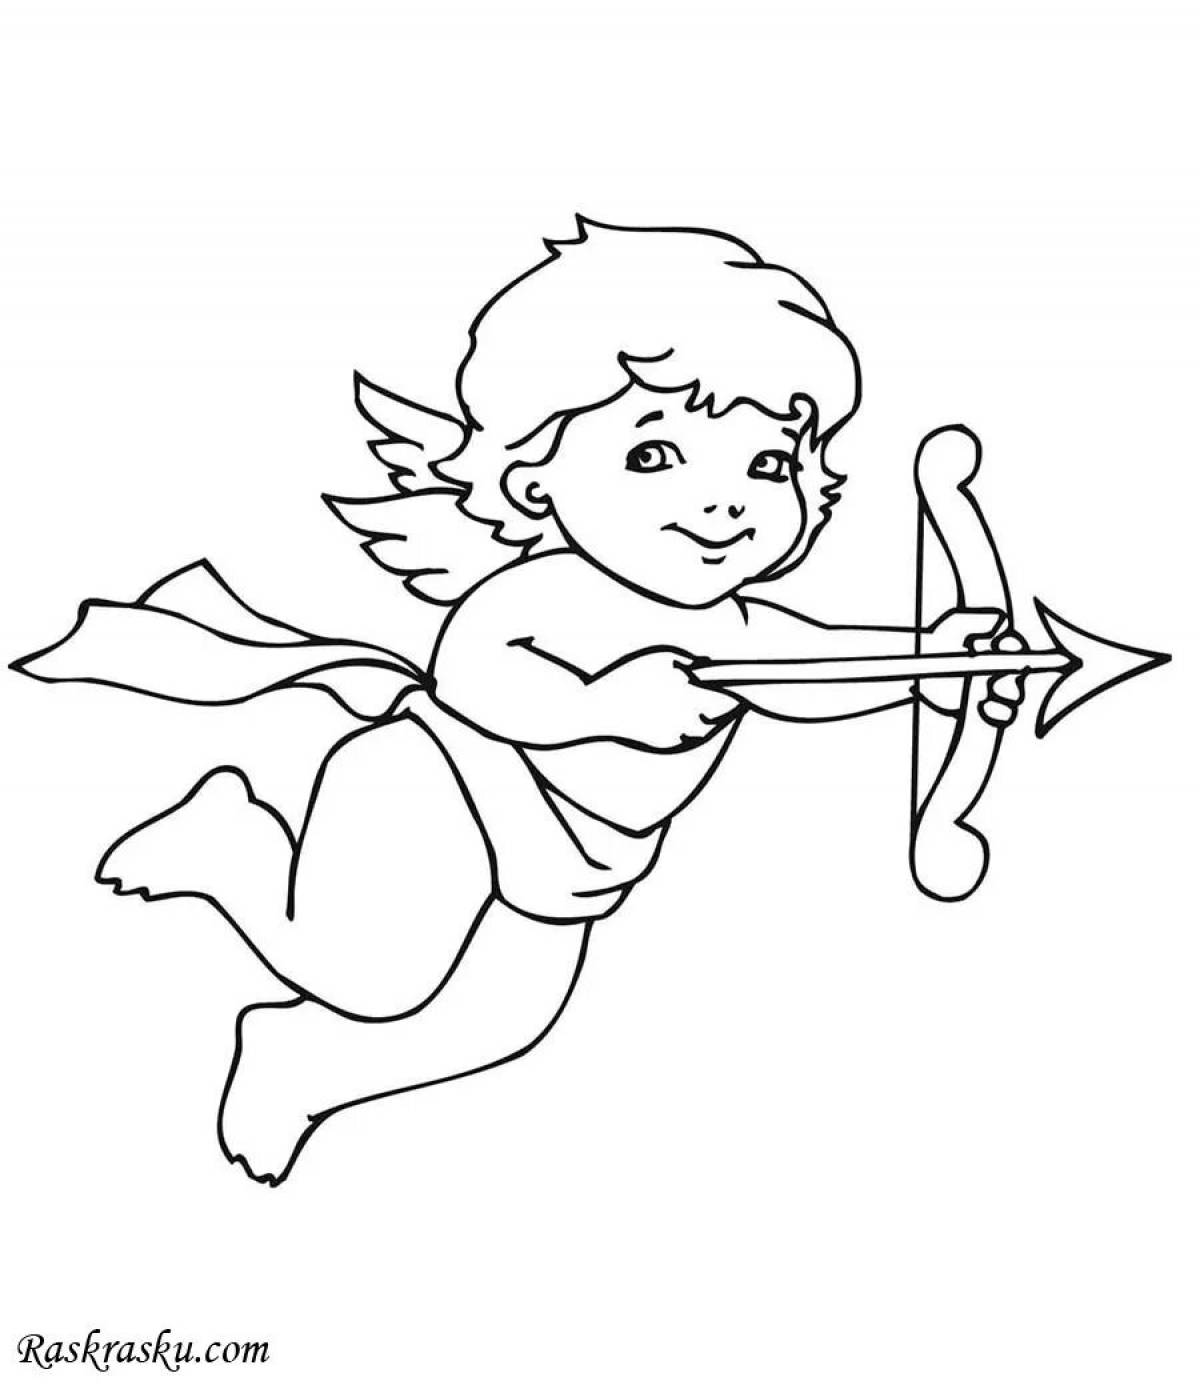 Sophisticated cupid coloring book